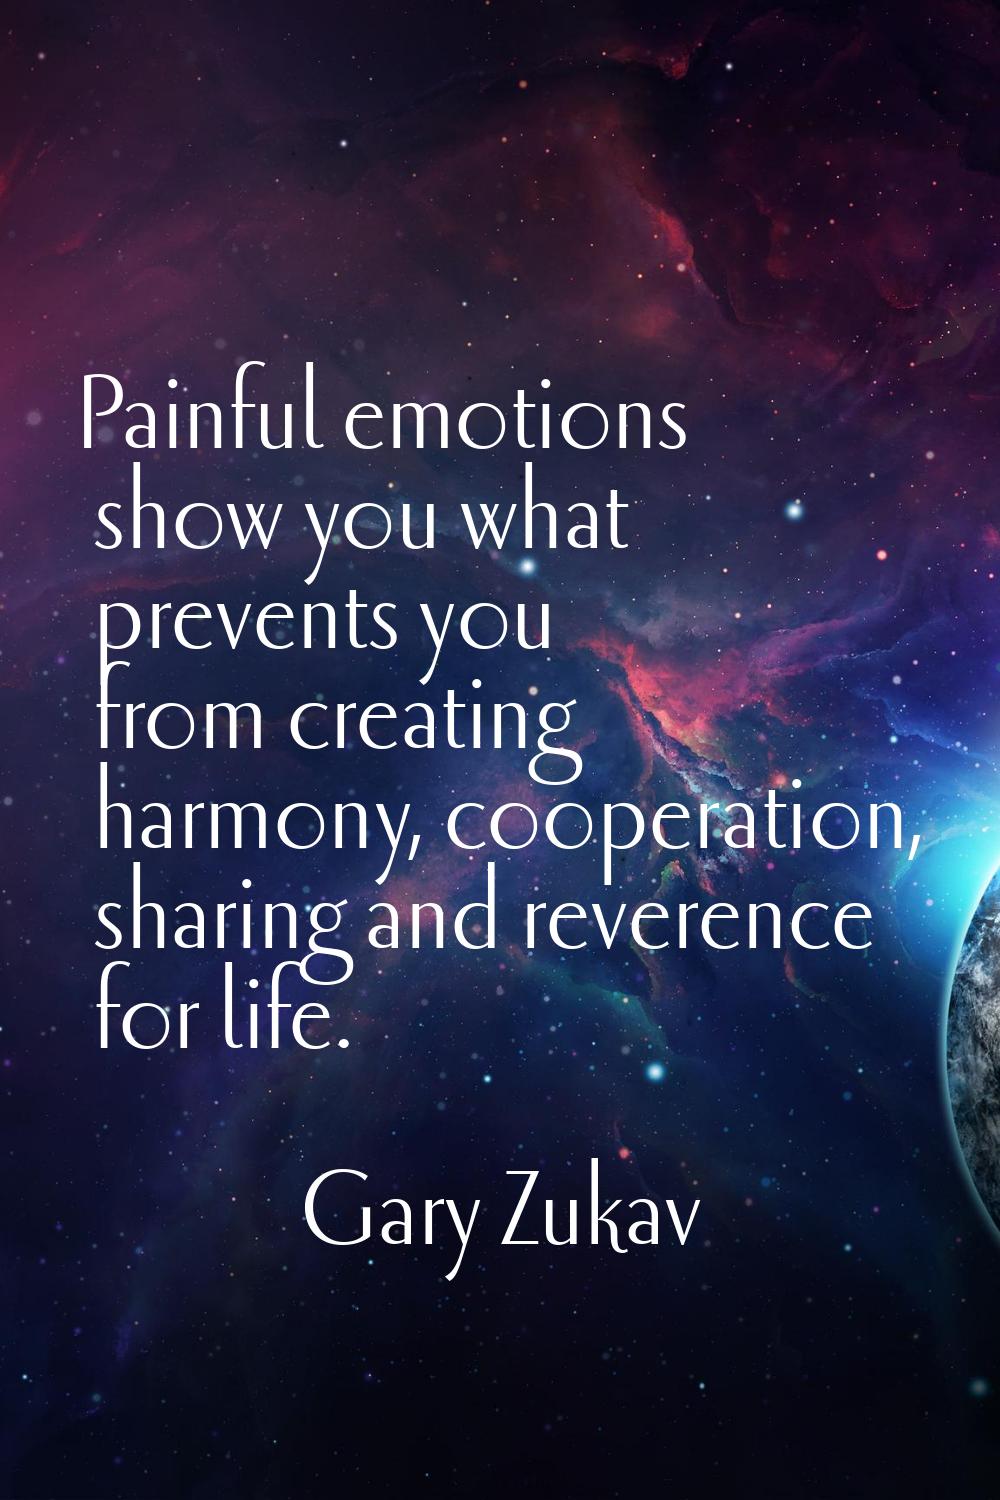 Painful emotions show you what prevents you from creating harmony, cooperation, sharing and reveren